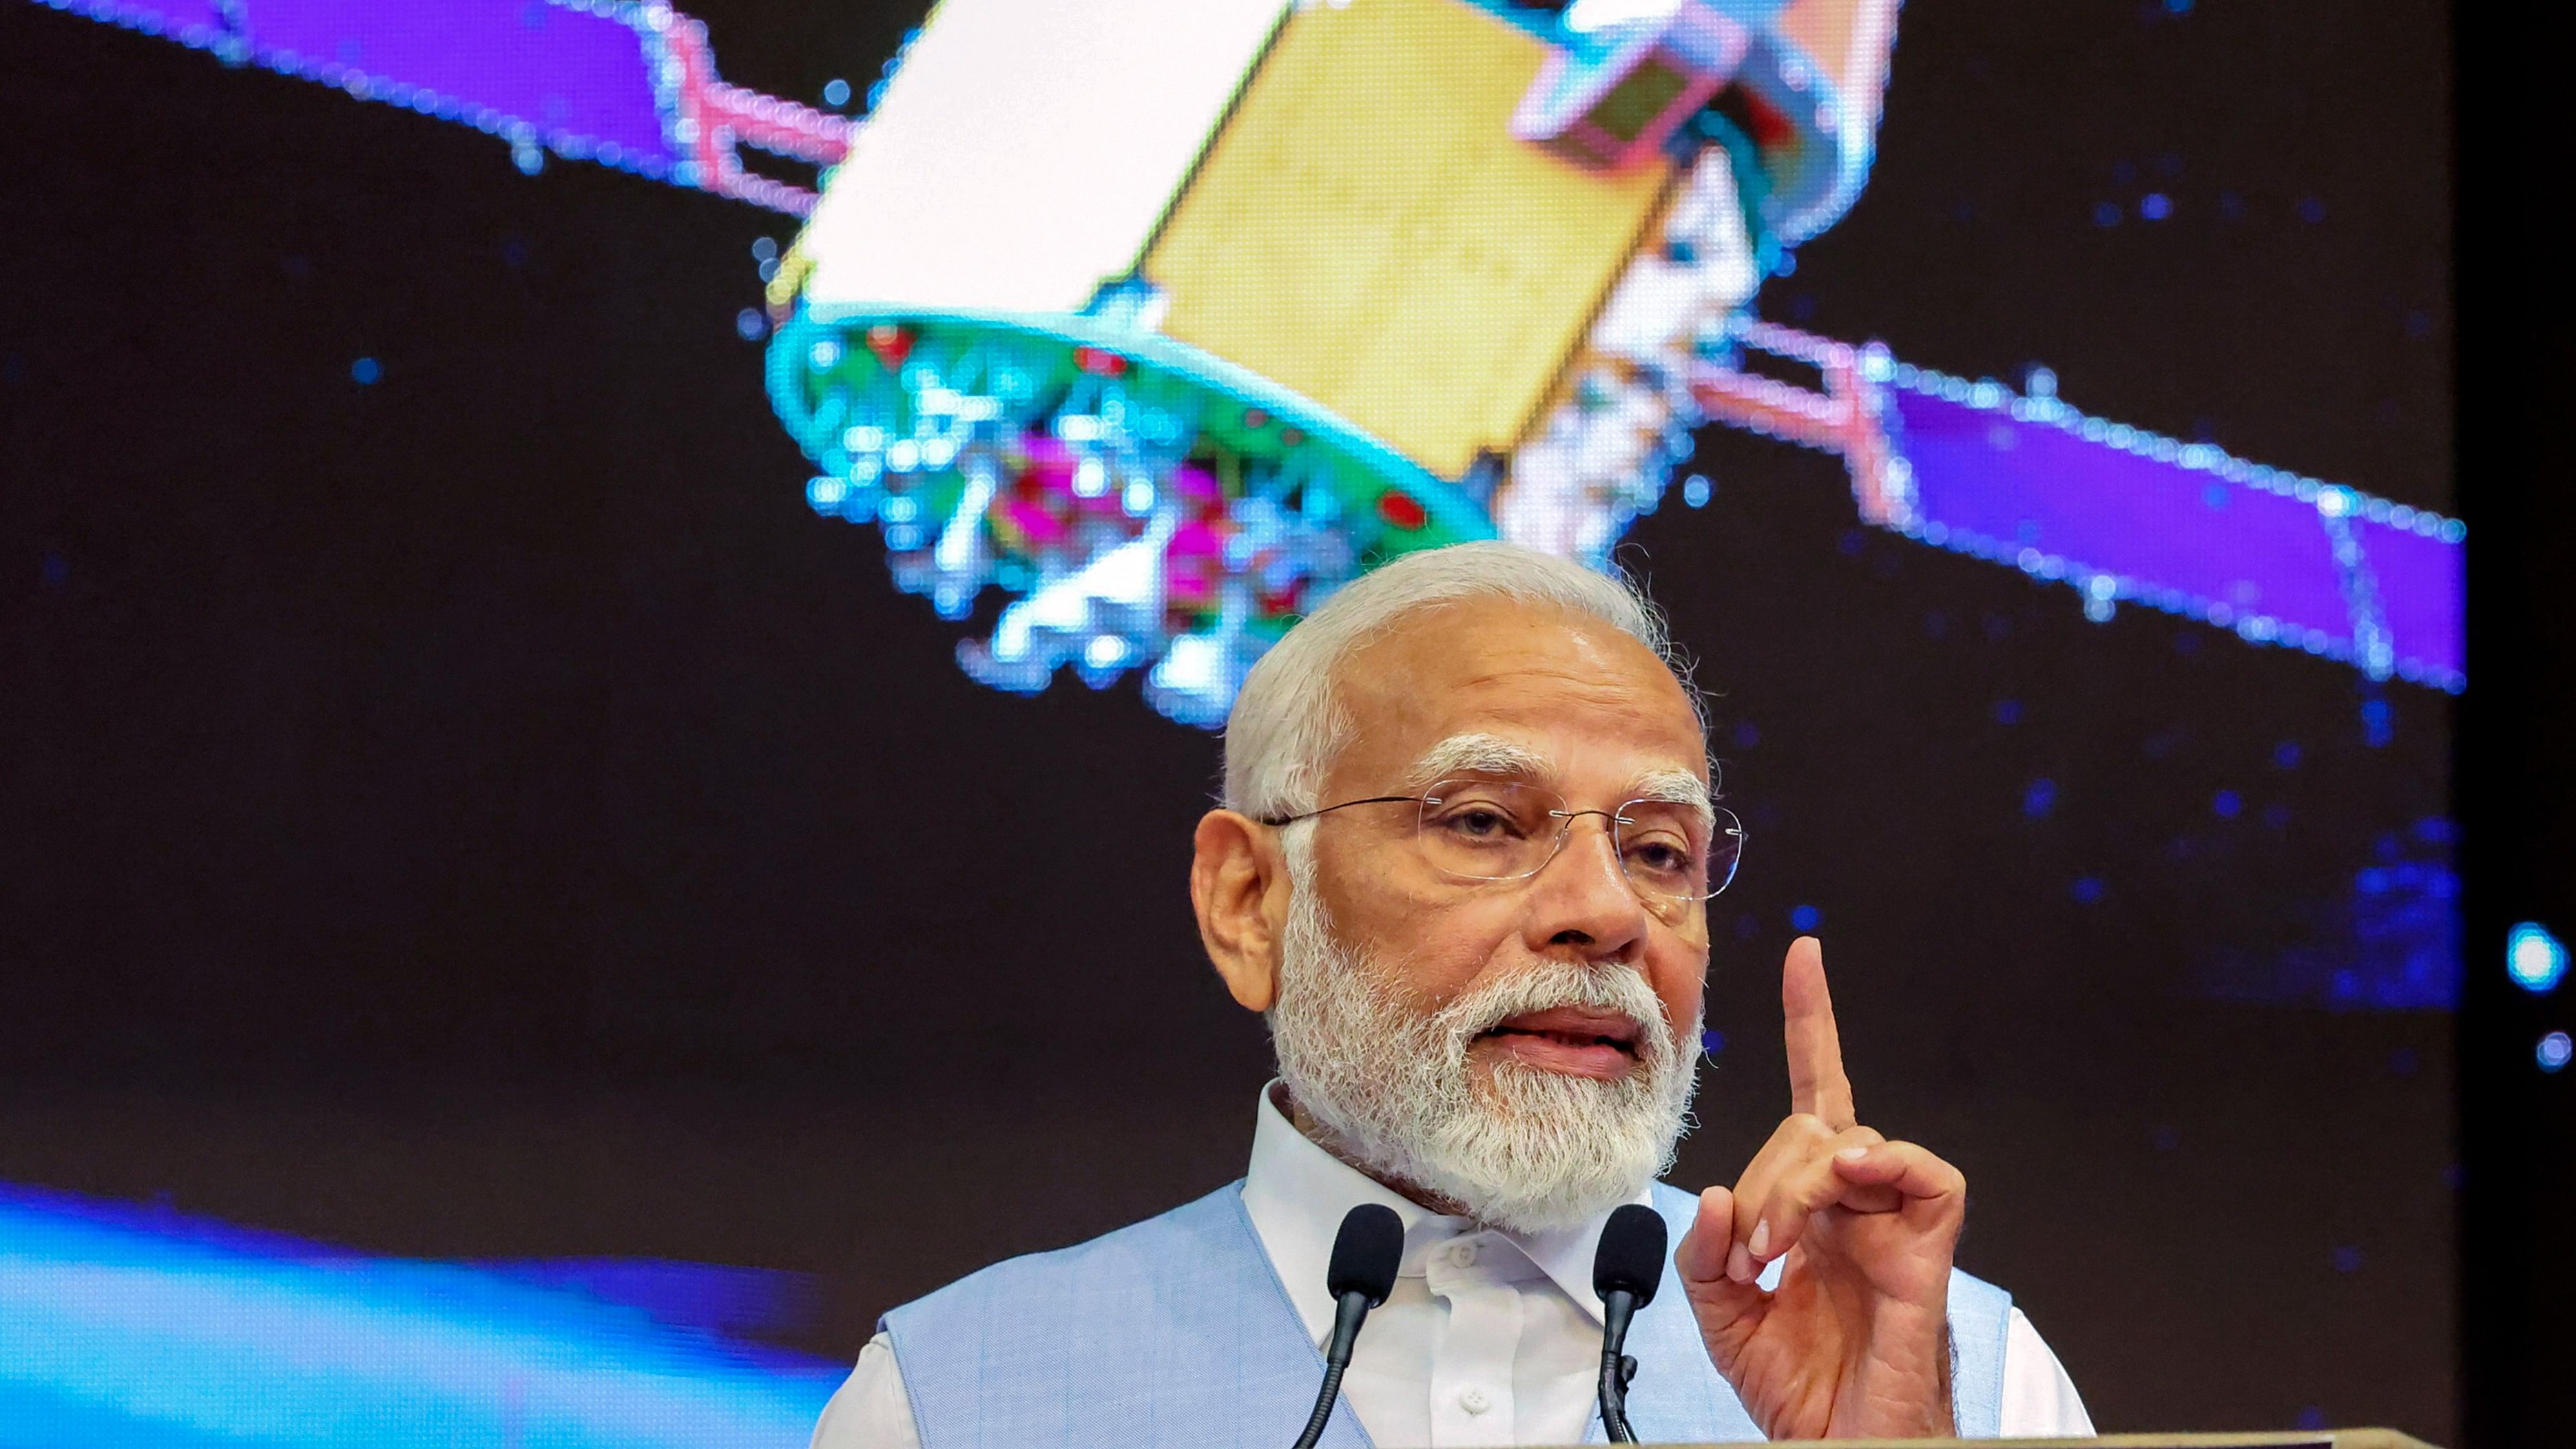 <div class="paragraphs"><p>While ISRO is one of the top national space agencies in the world, the private sector was slow to develop because the government allowed only a few vendors and manufacturers to participate.</p></div>